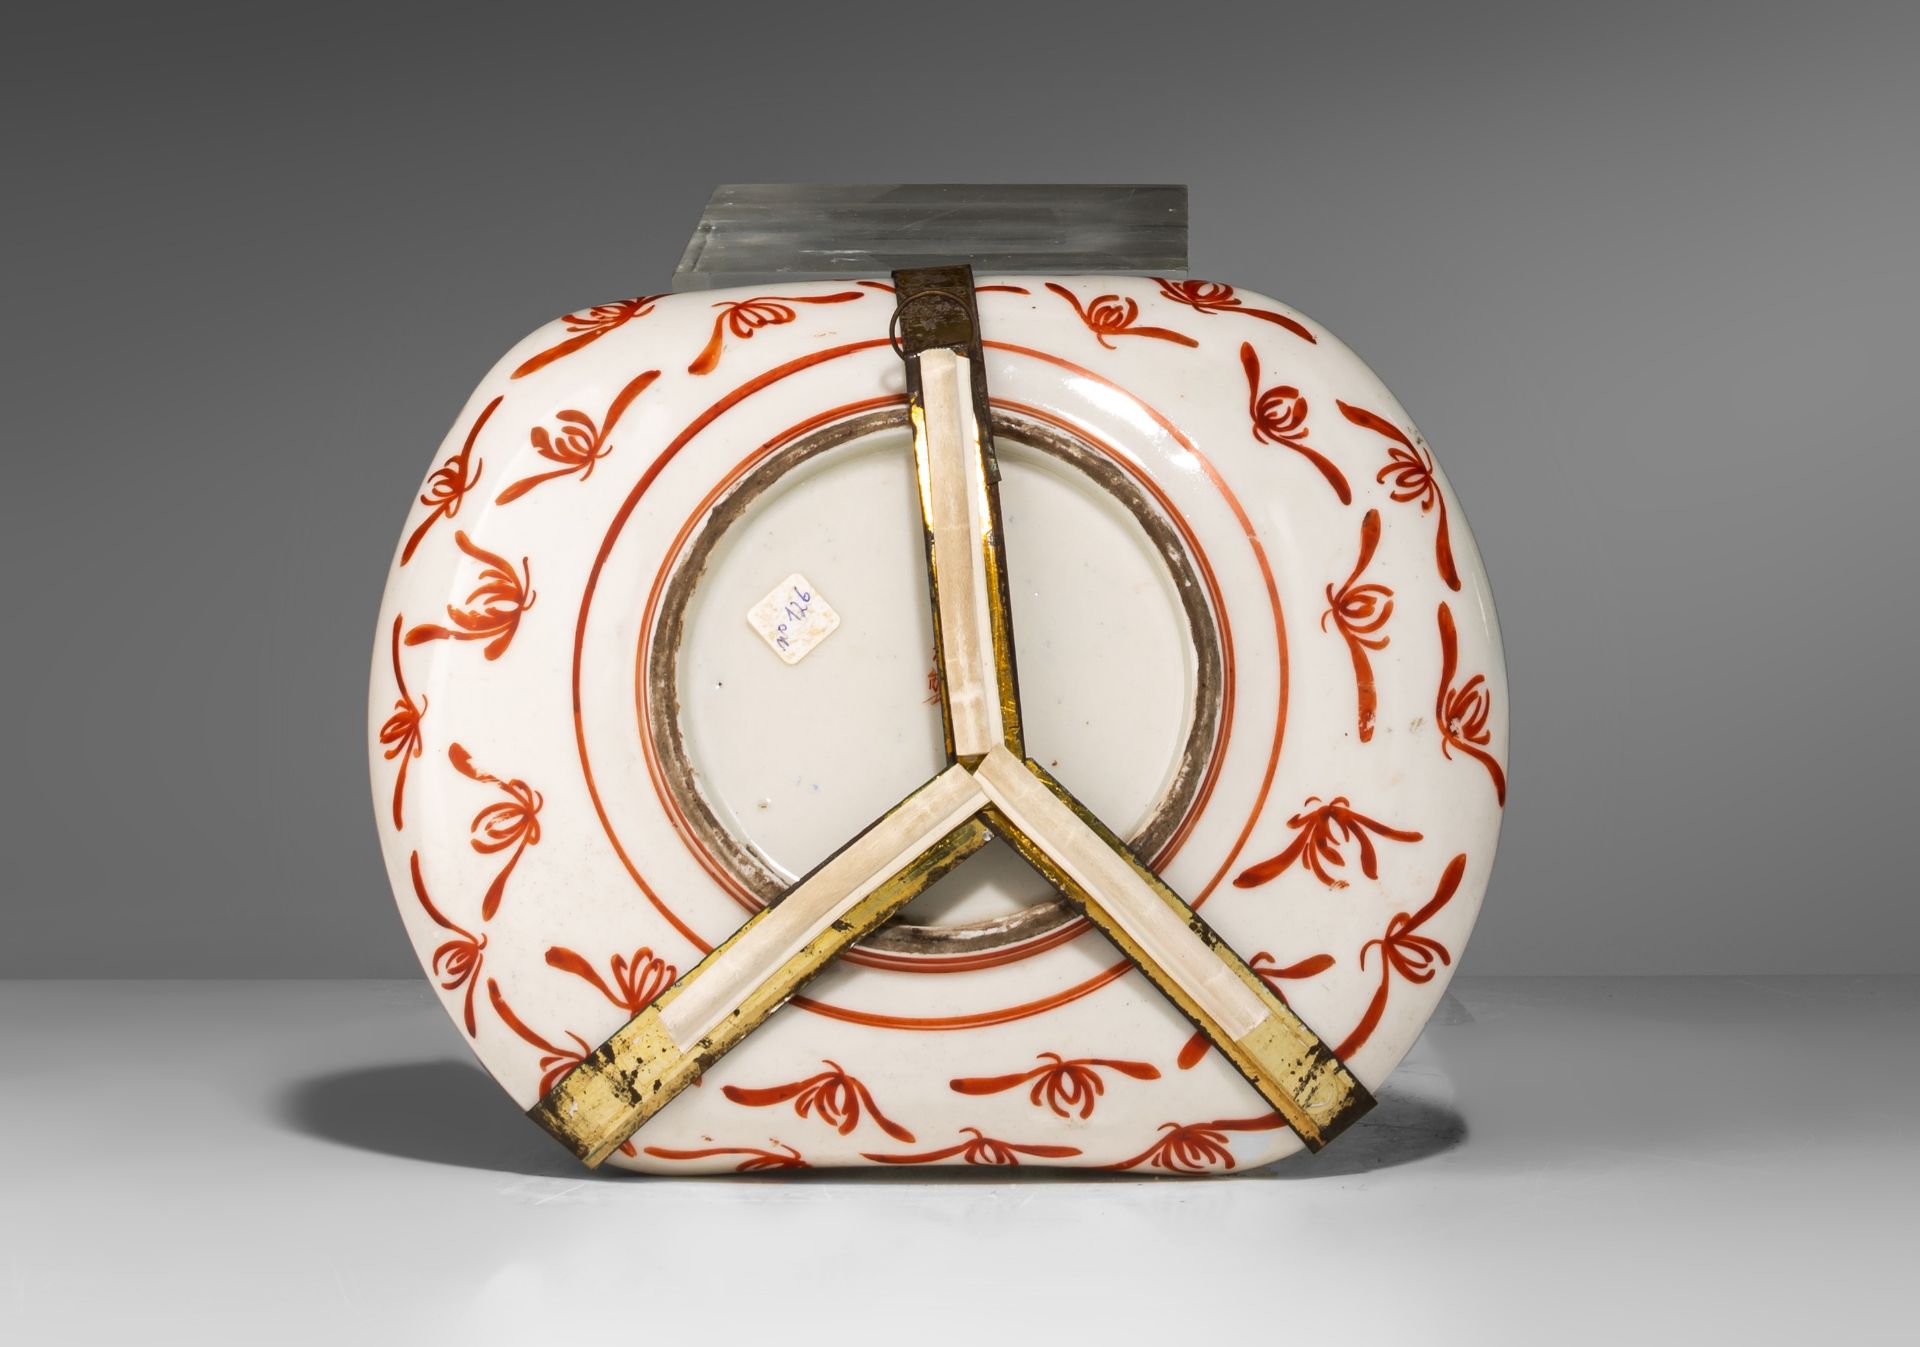 A Japanese Imari charger and a 'Rolled' plate, late 19thC, ø 47,5 (charger) - 22,5 x 18 cm (plate) - Image 5 of 5